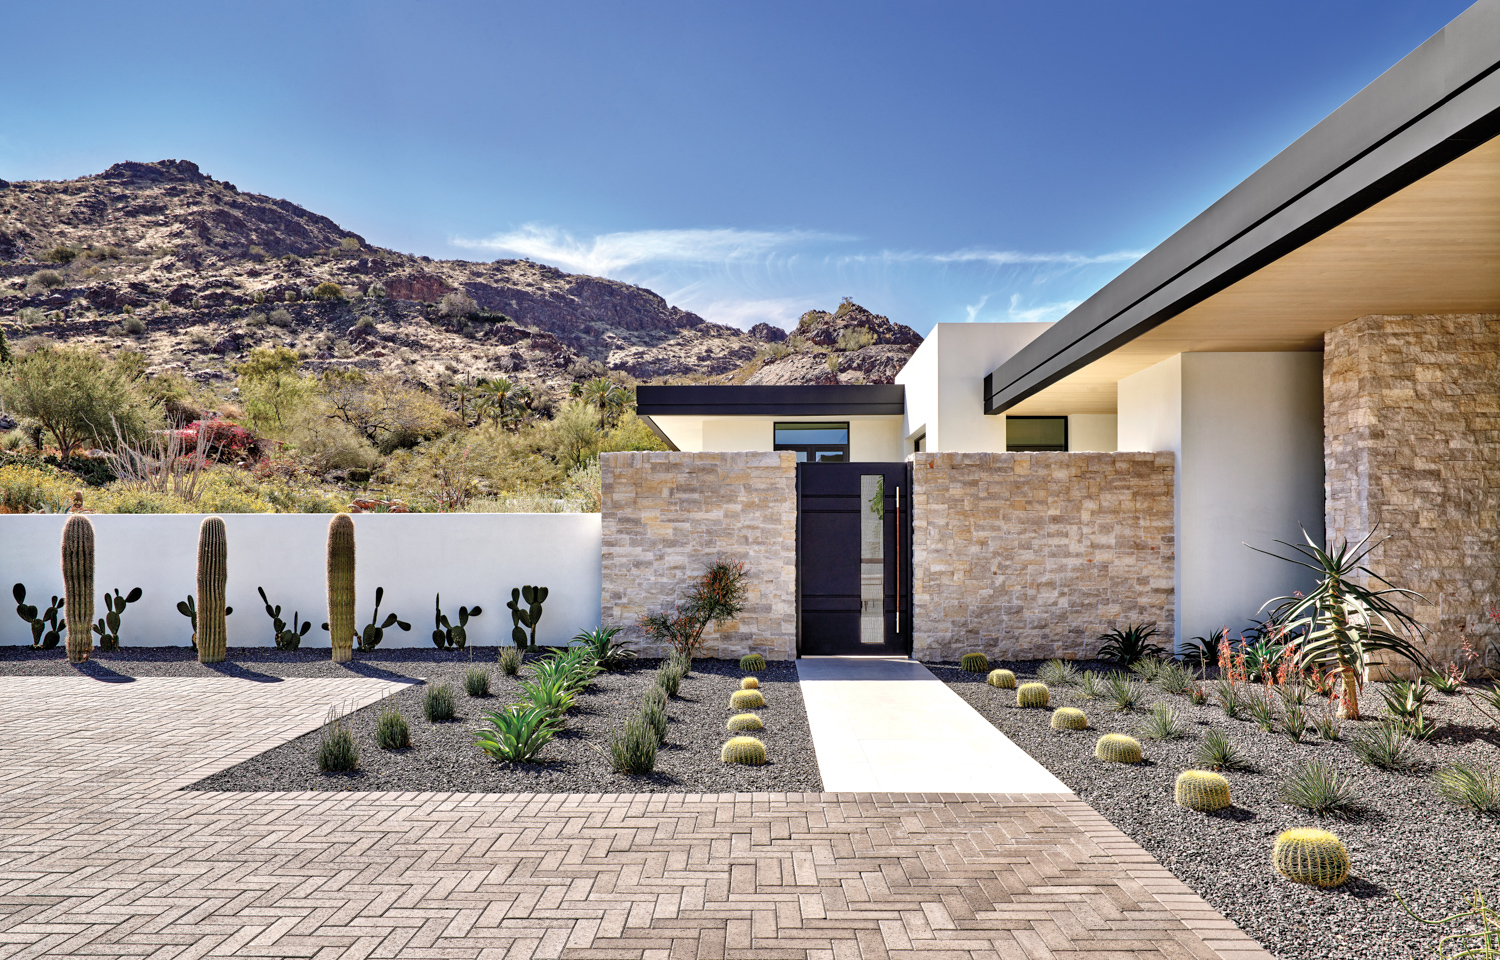 The courtyard of a home with native desert plantings A mountain is in the background.